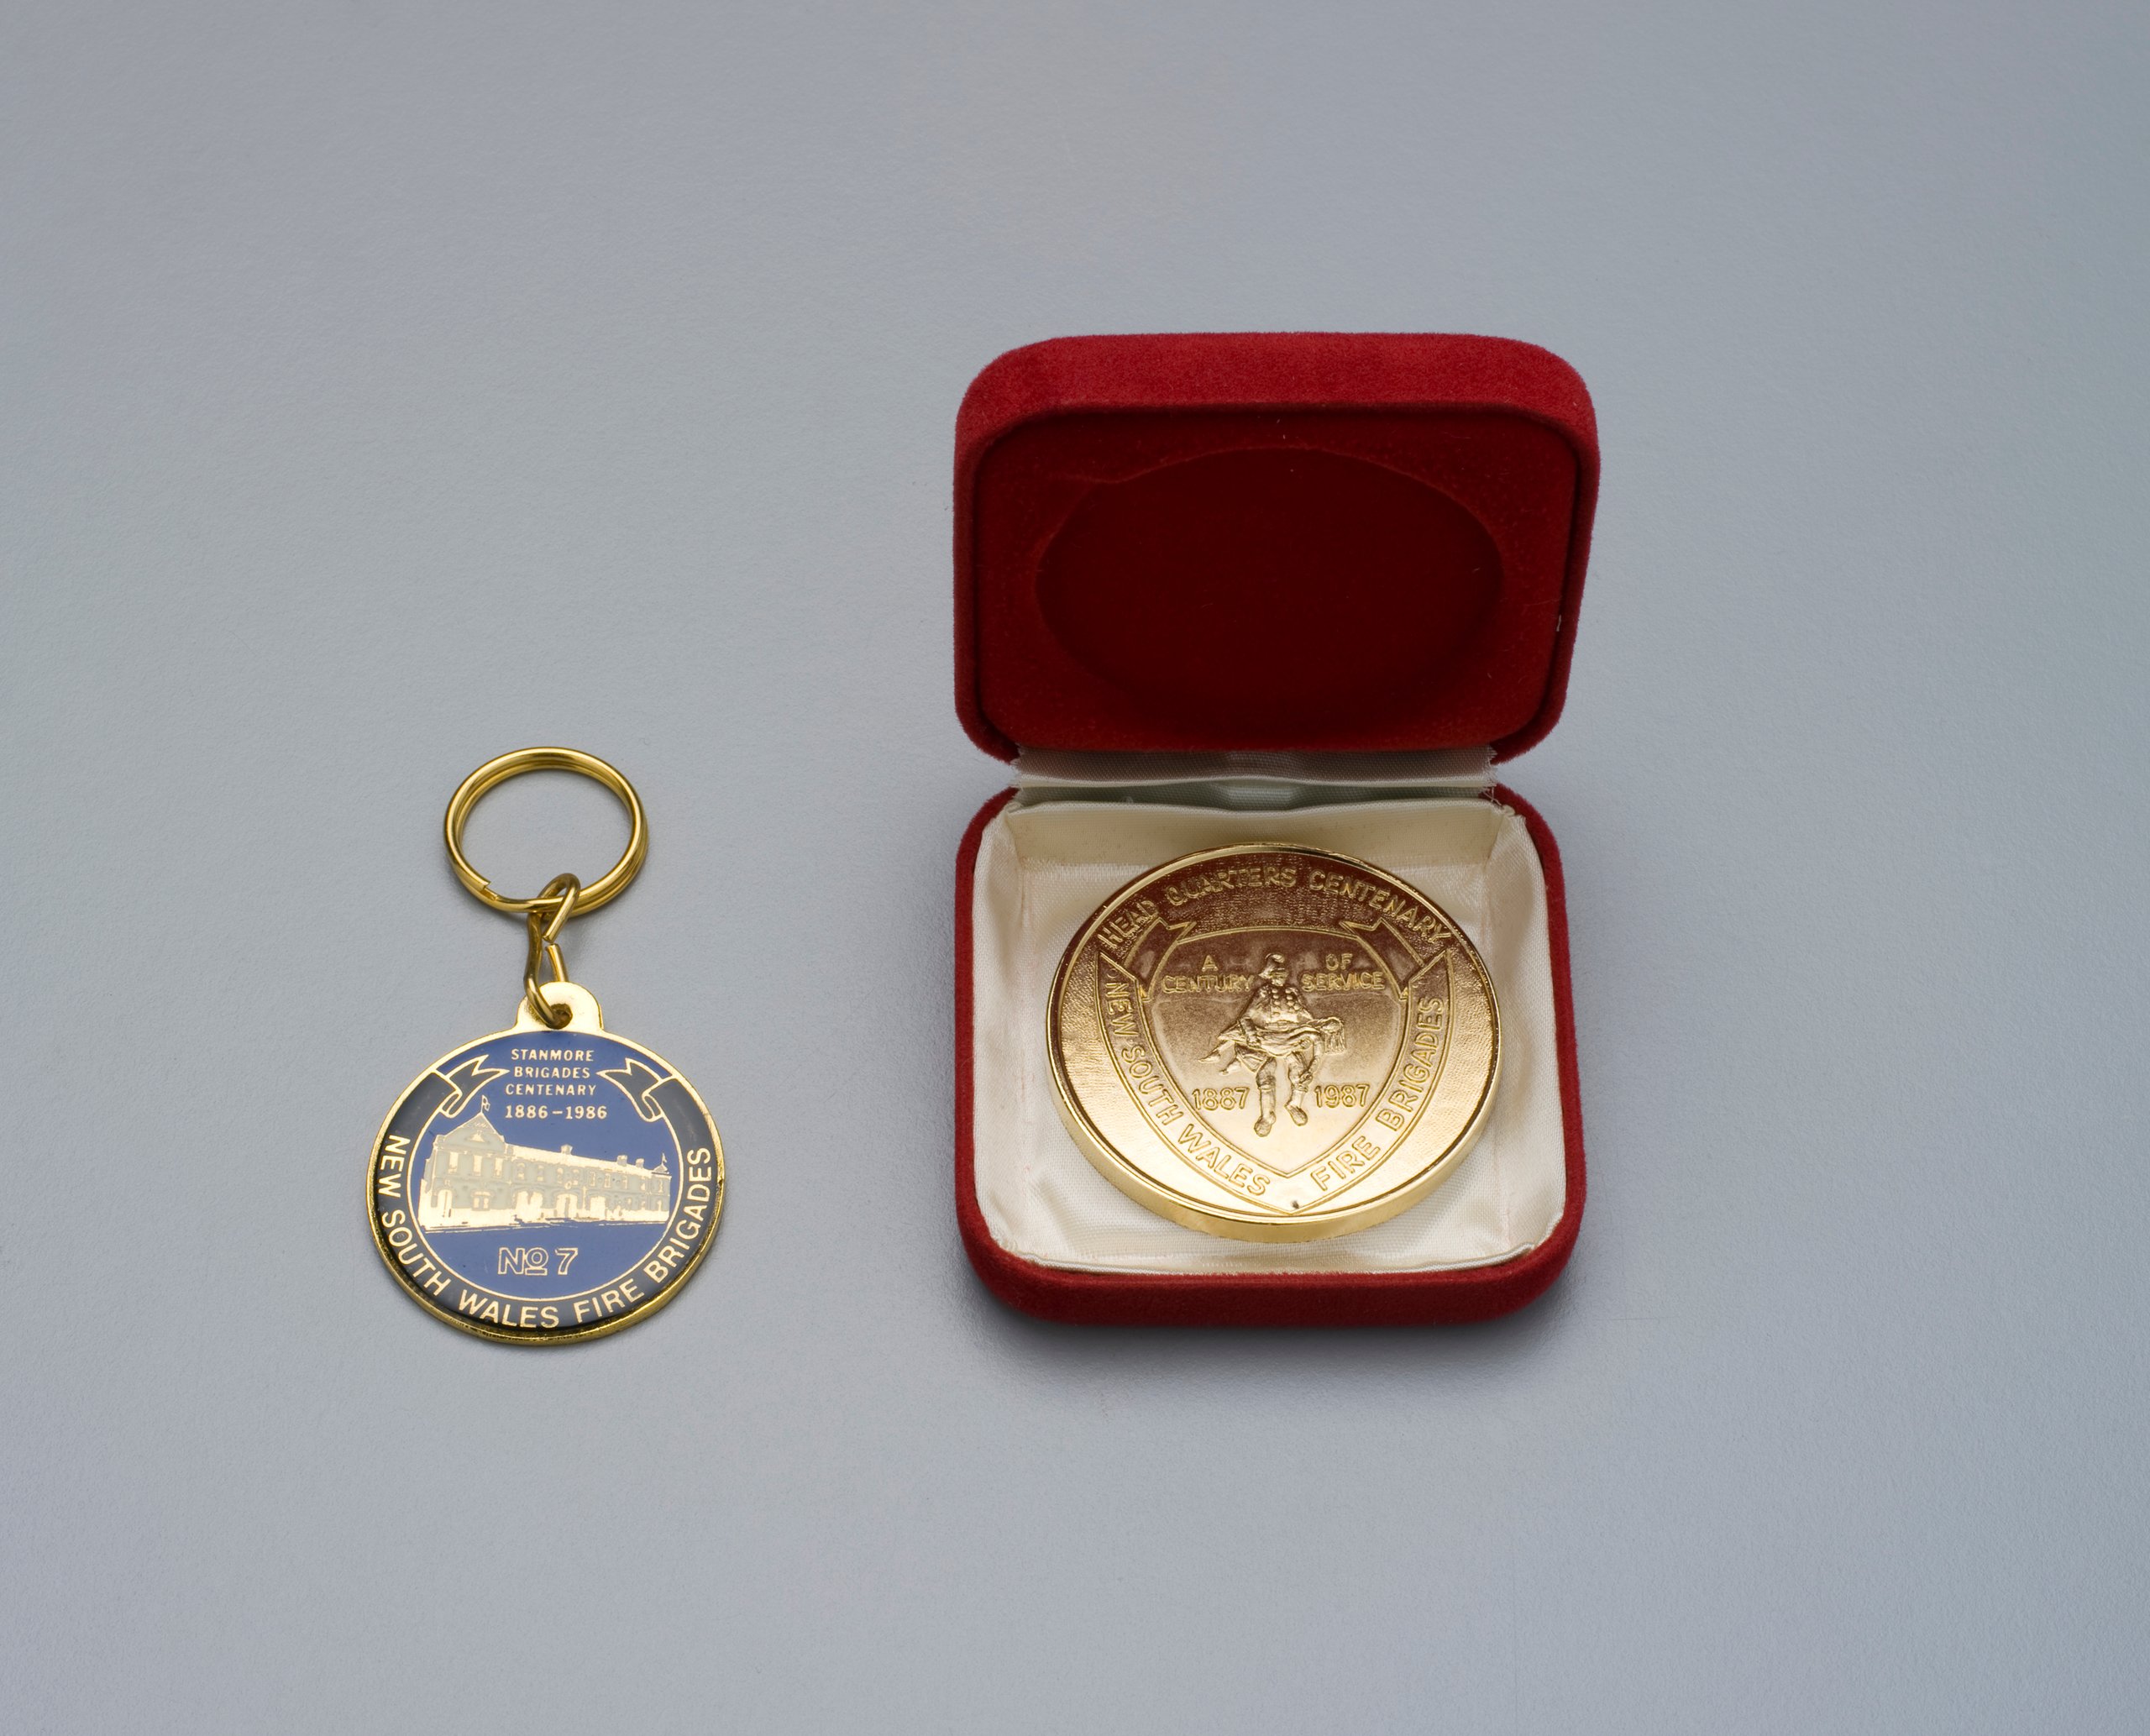 Commemorative medallion in case and key fob